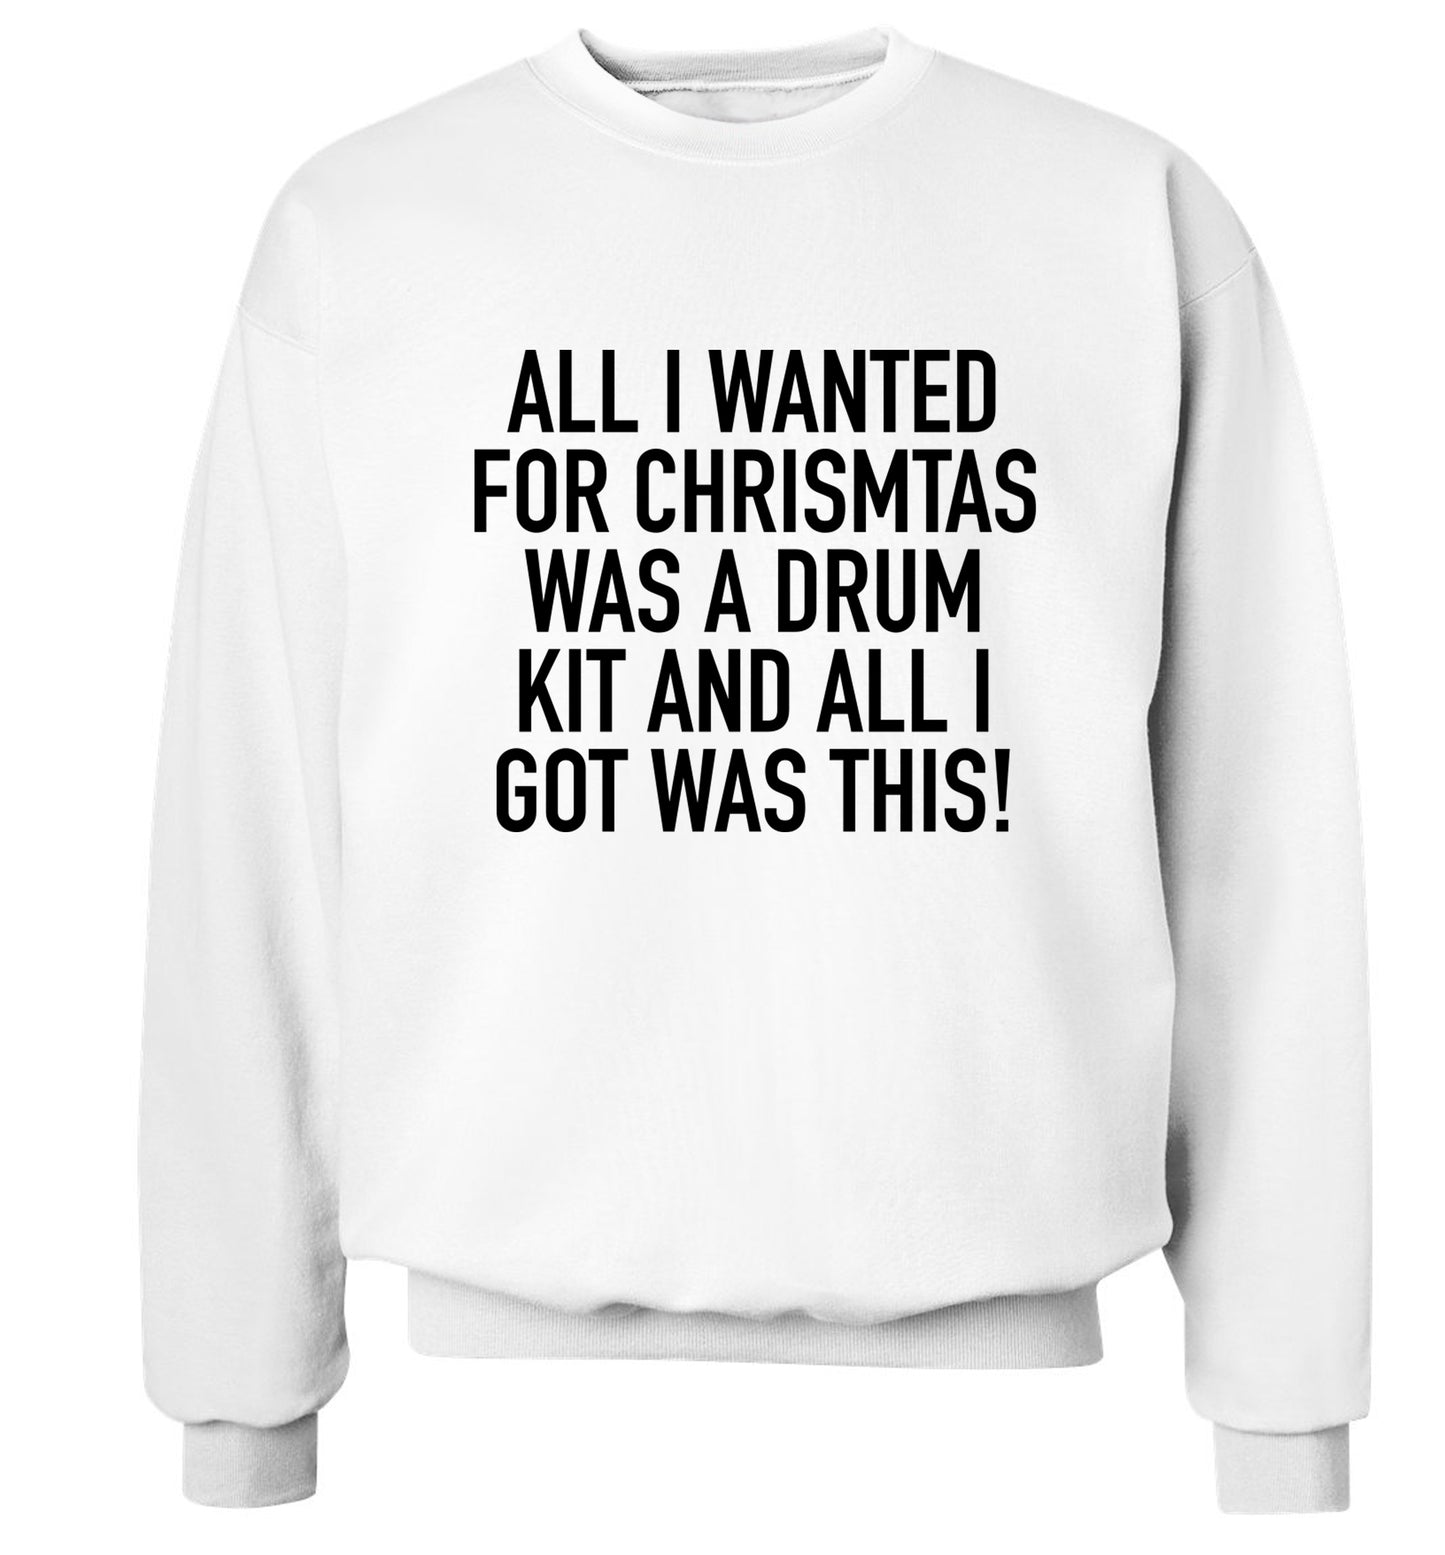 All I wanted for Christmas was a drum kit and all I got was this! Adult's unisex white Sweater 2XL